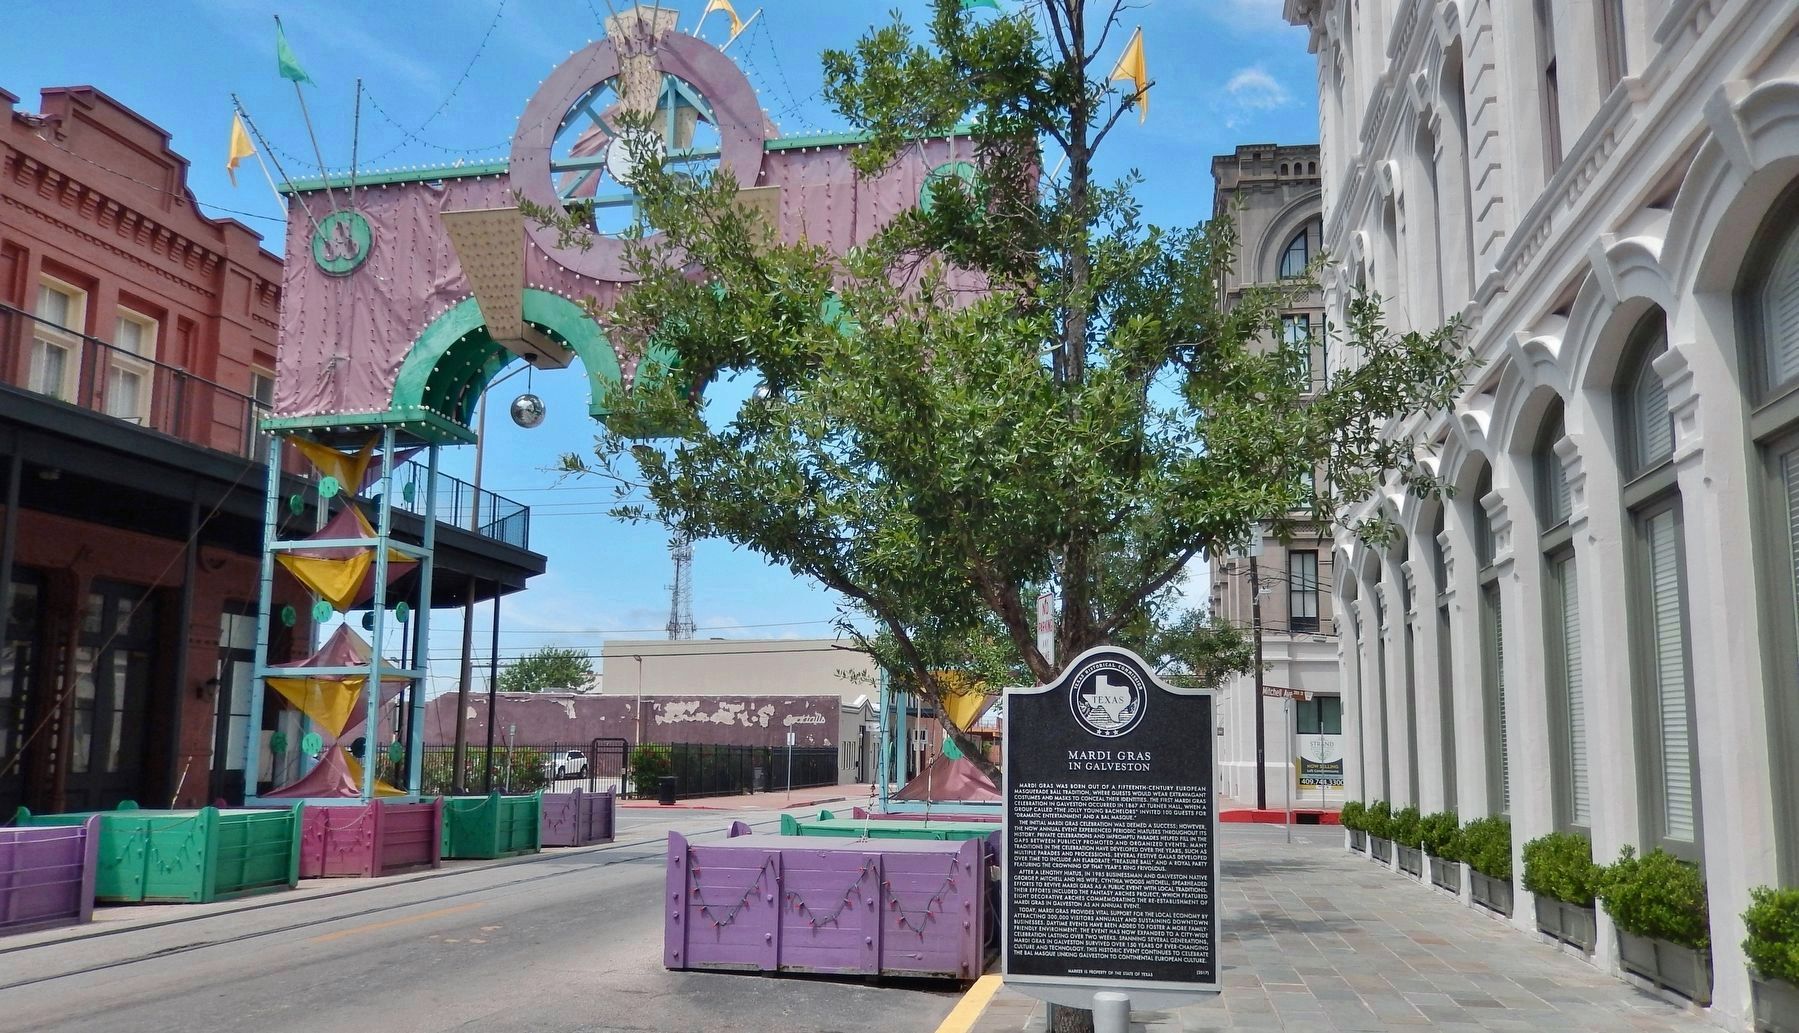 Mardi Gras in Galveston Marker (<i>wide view; showing Mardi Gras Arch in street at left</i>) image. Click for full size.